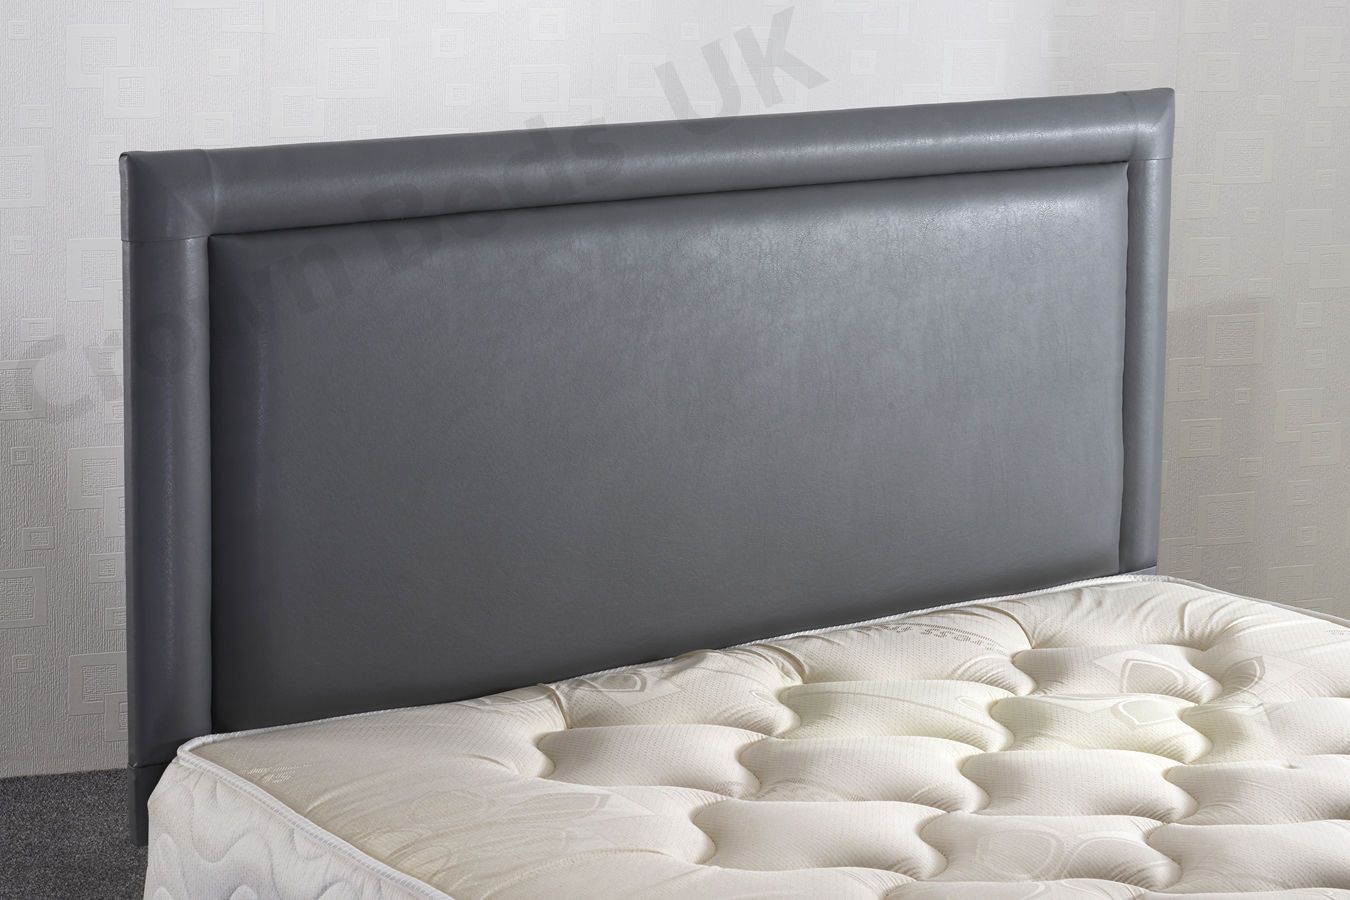 Home Deco Centre Bumper Frenzy Faux, Faux Leather Headboard Full